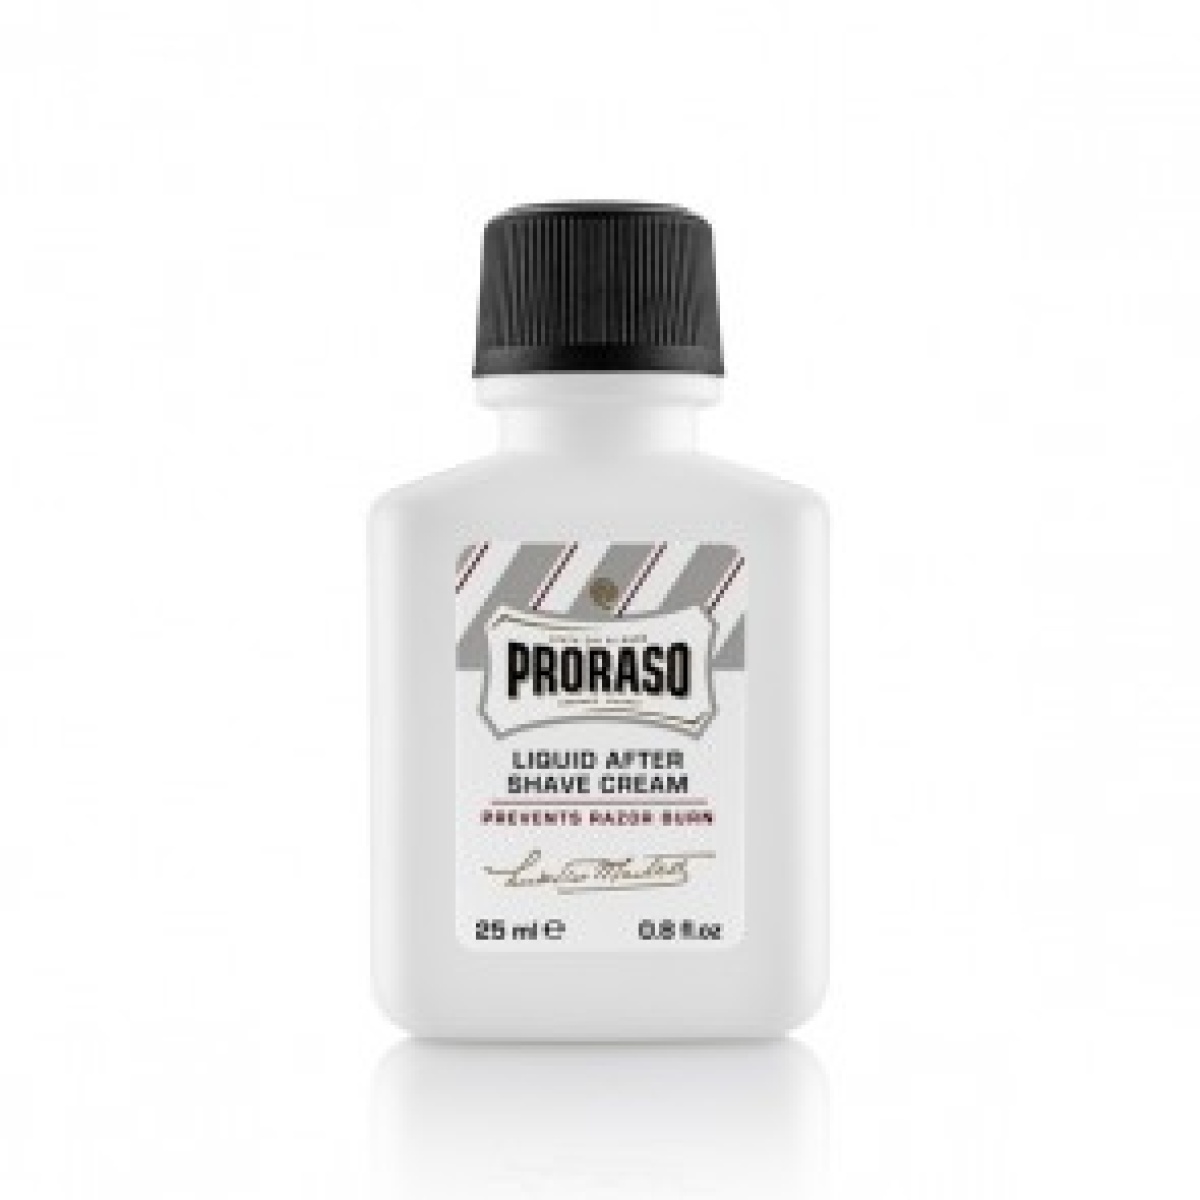 After shave balsam - Proraso - 25ml - Ταξιδίου-0